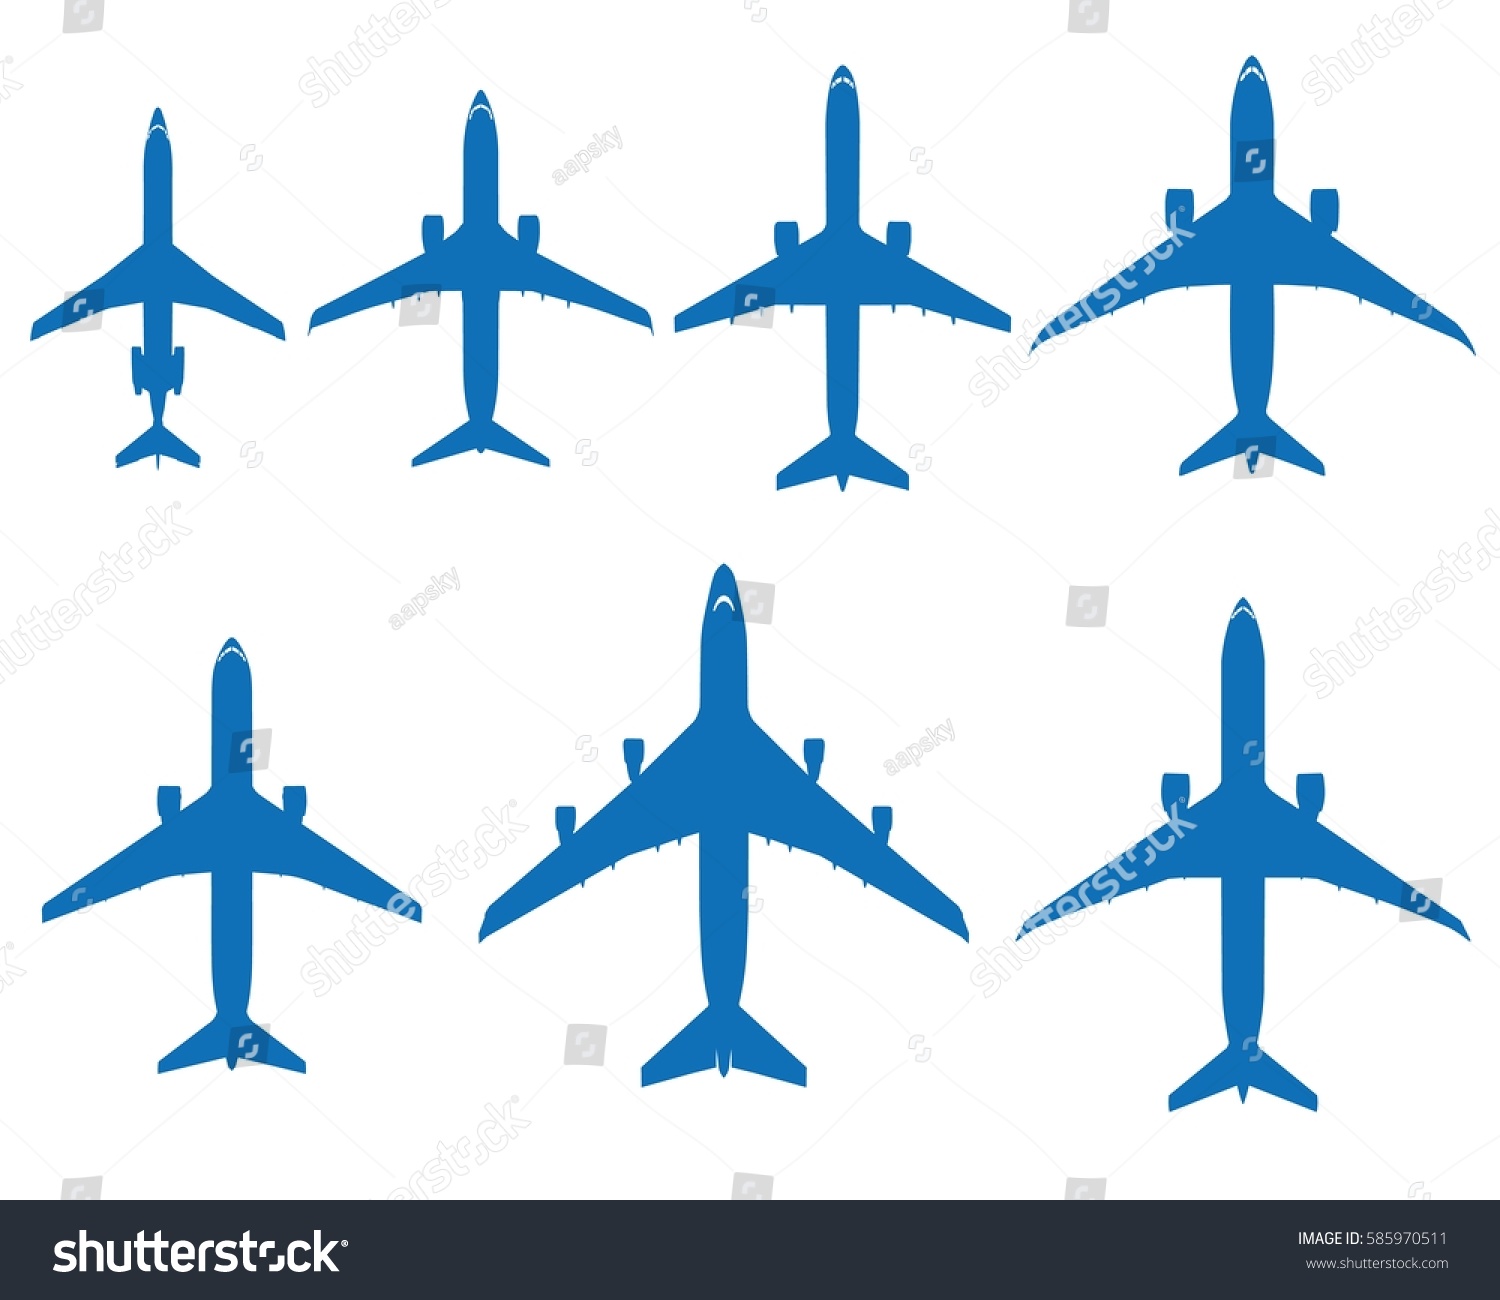 SVG of Package silhouettes of real airplanes, one series svg